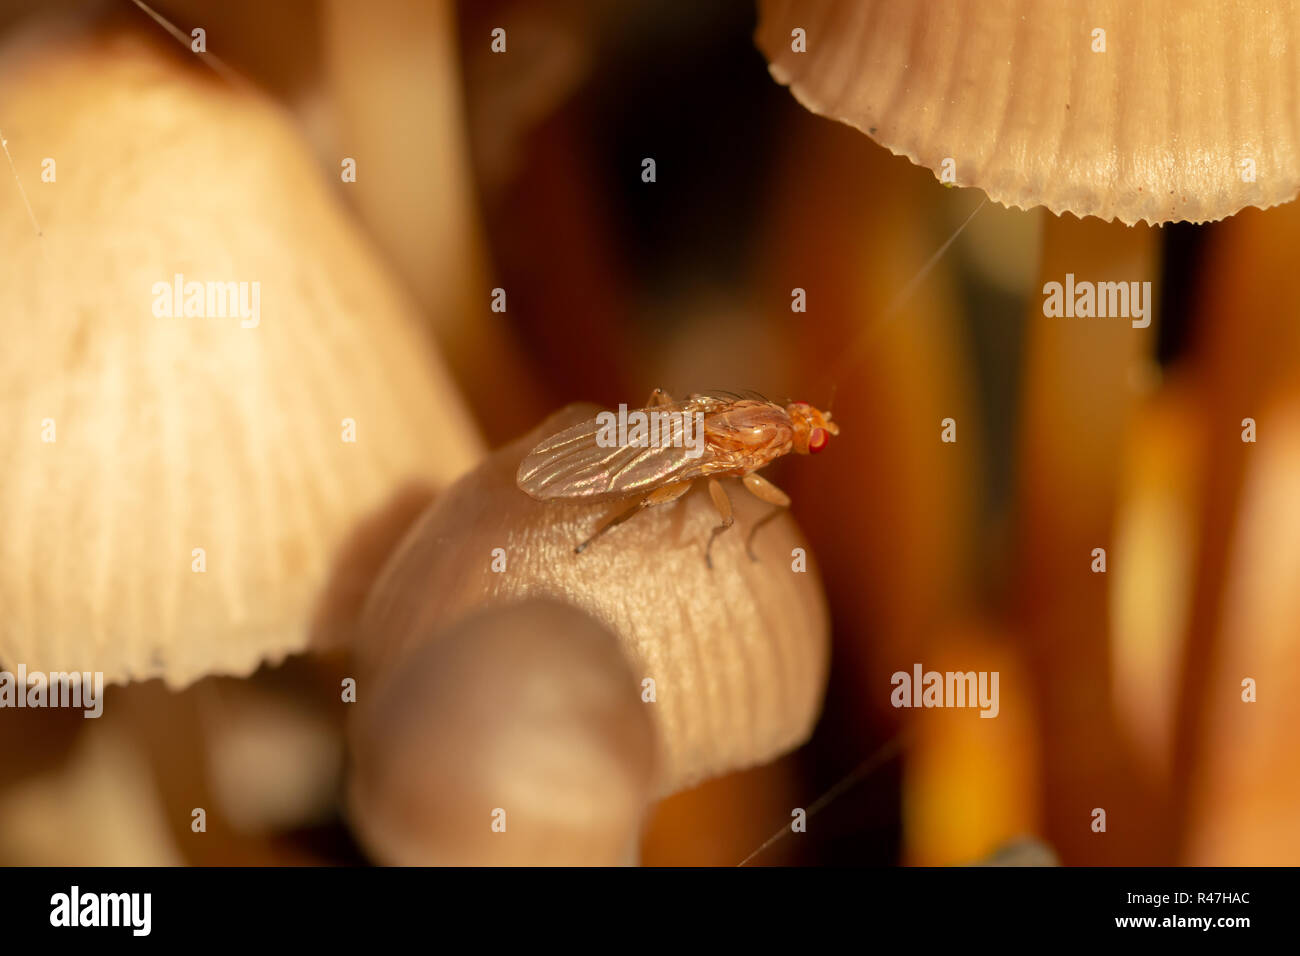 Macro colour photograph of tiny brown fly perched on mushroom cap within mushroom clump in landscape orientation. Stock Photo